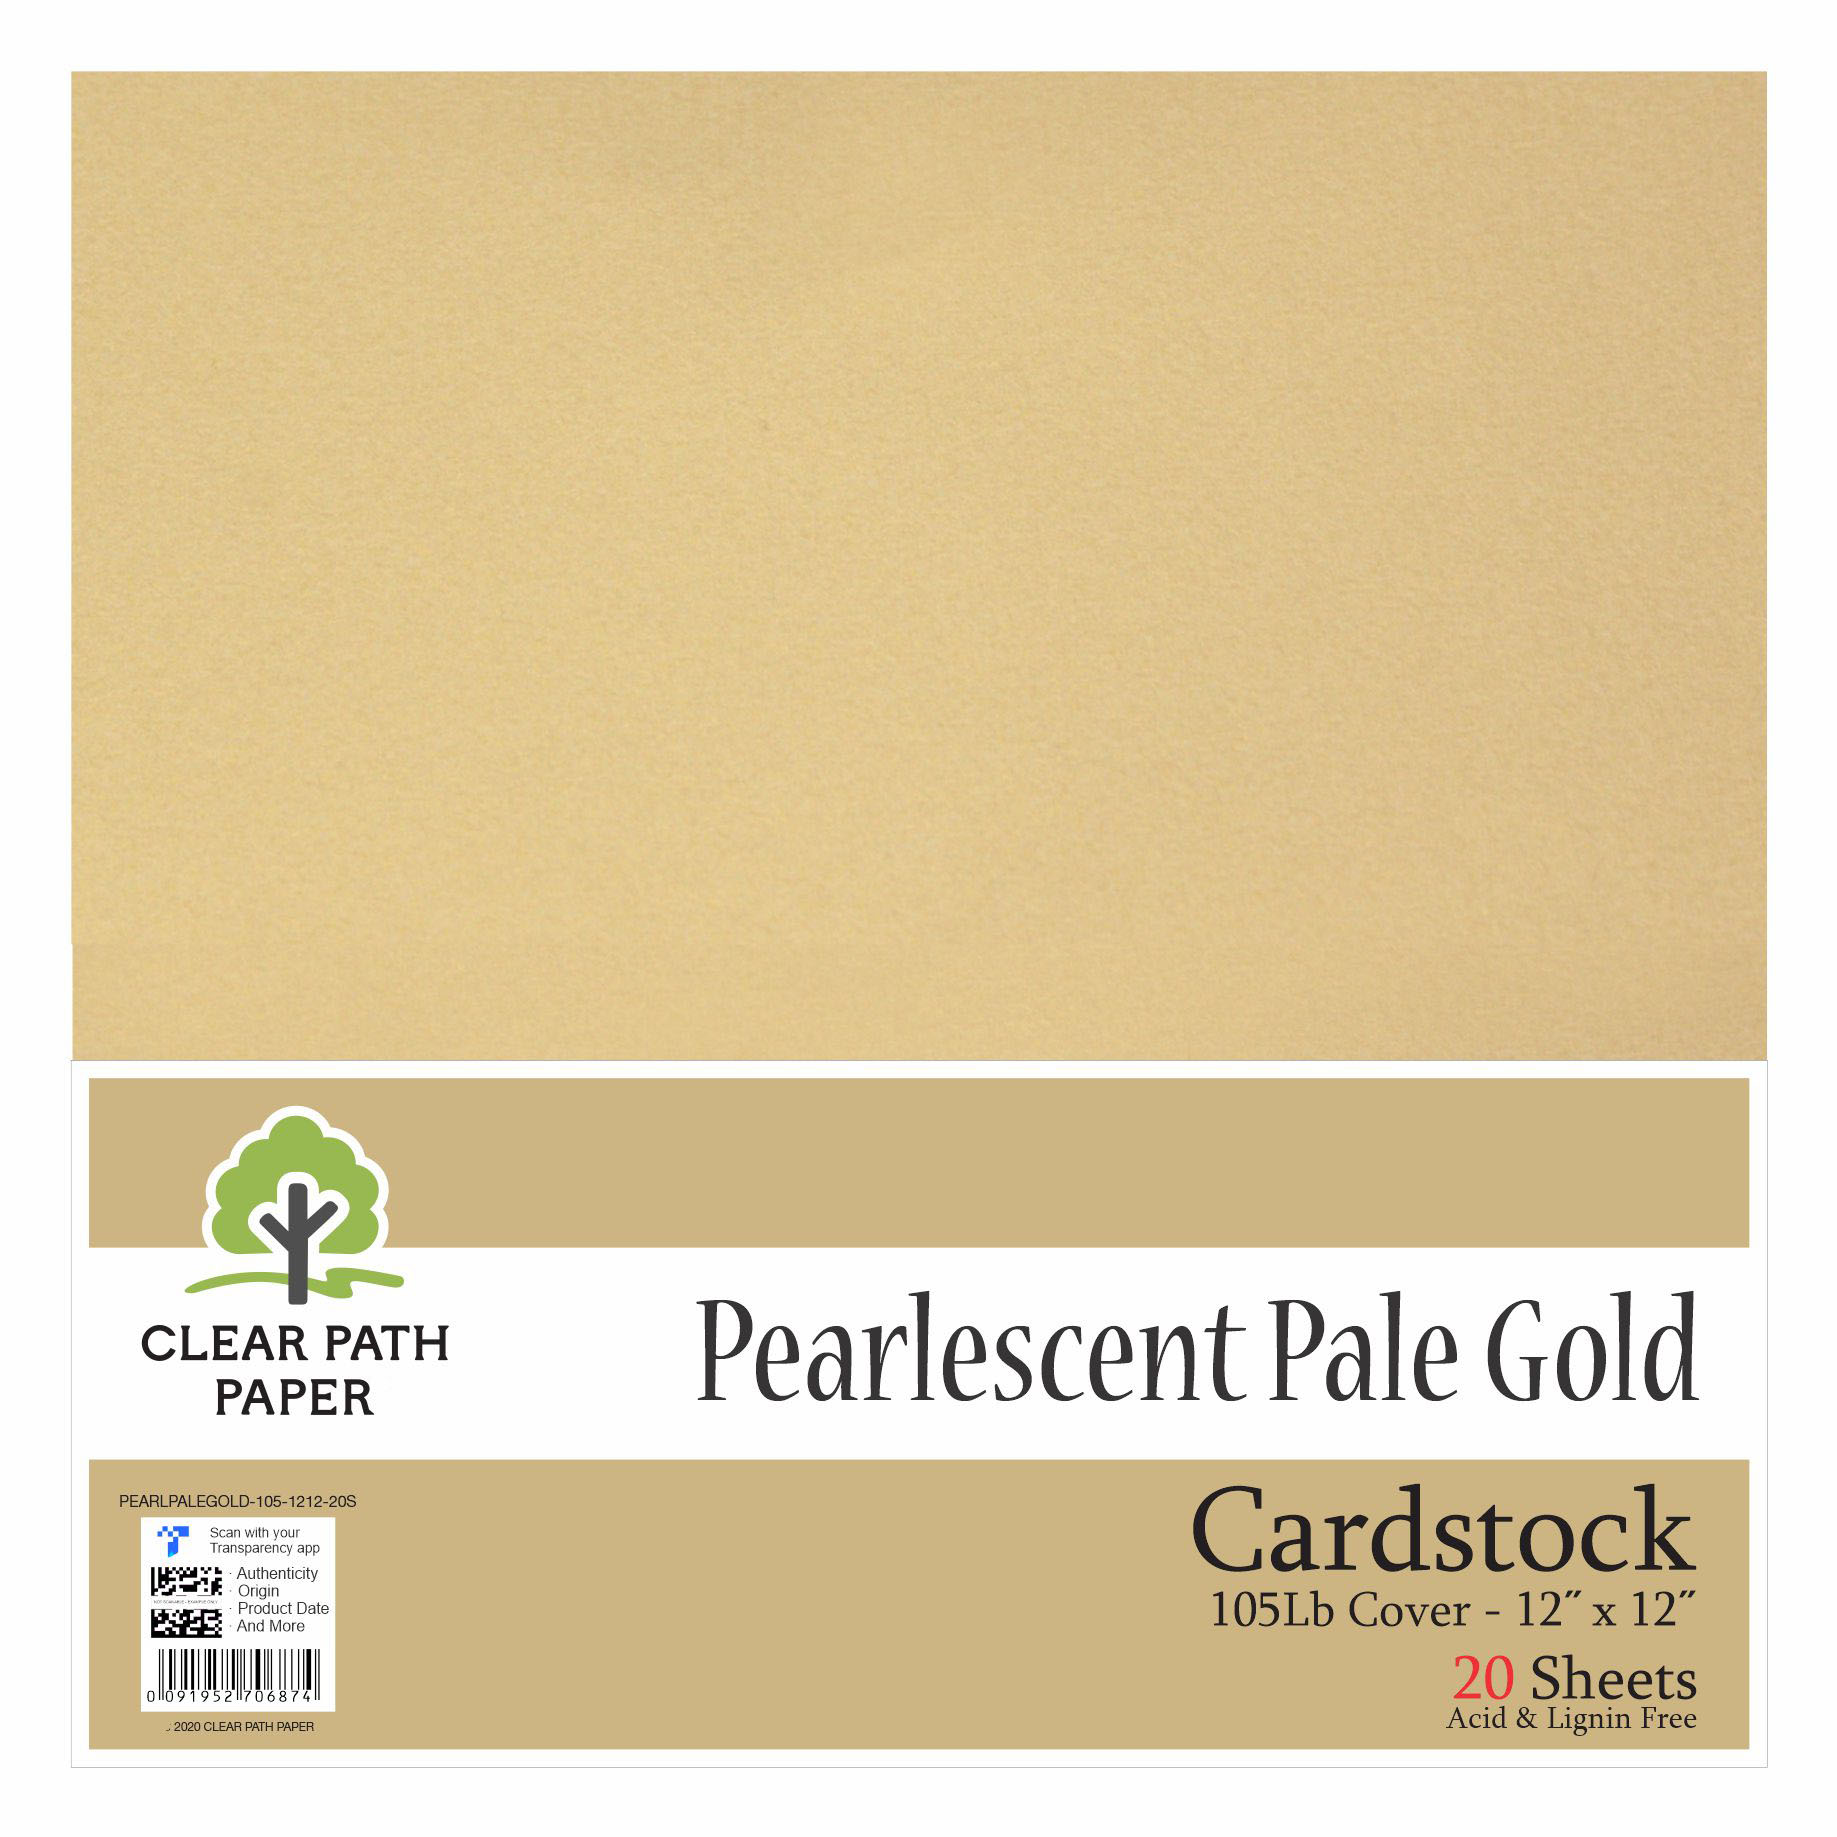 Pearlescent Pale Gold Cardstock - 12 x 12 inch - 105Lb Cover - 20 Sheets -  Clear Path Paper 